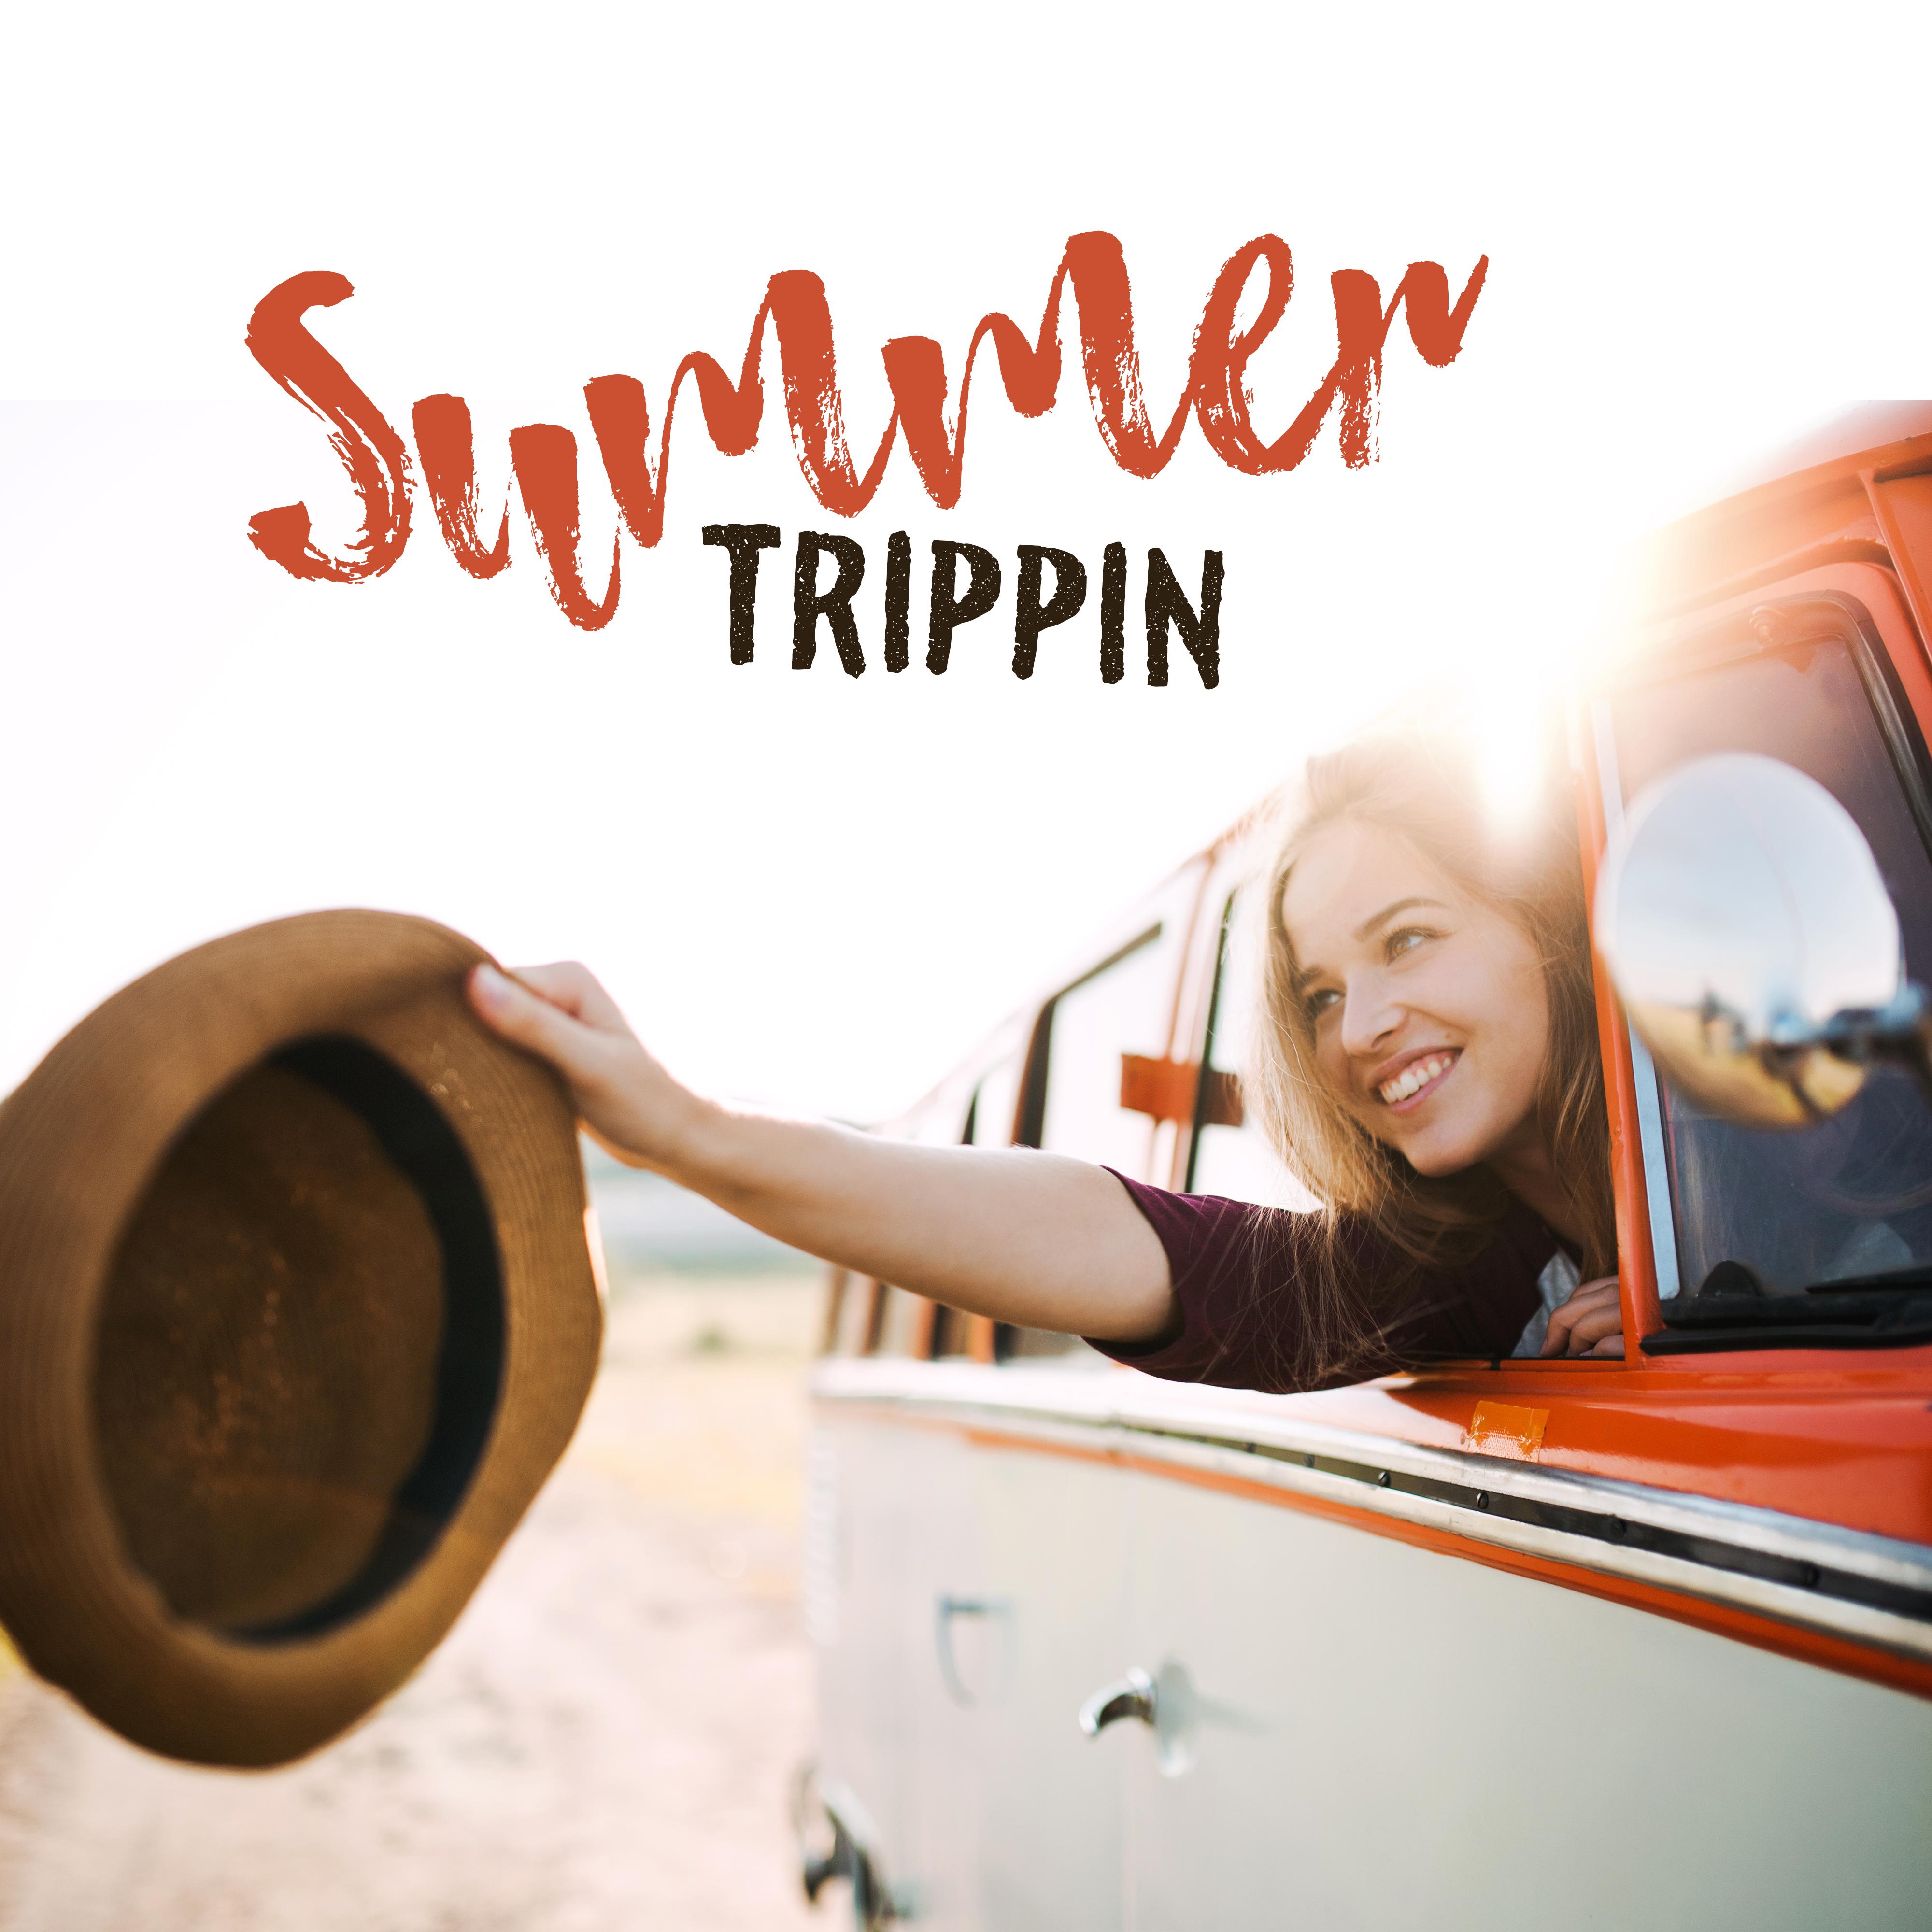 Summer Trippin: Holiday Music of Ibiza 2019, Tropical Sounds, Rest by the Sea, Music for Sunbathing, Relaxation and Lounging on the Beach, Summer Chillout Soundscapes